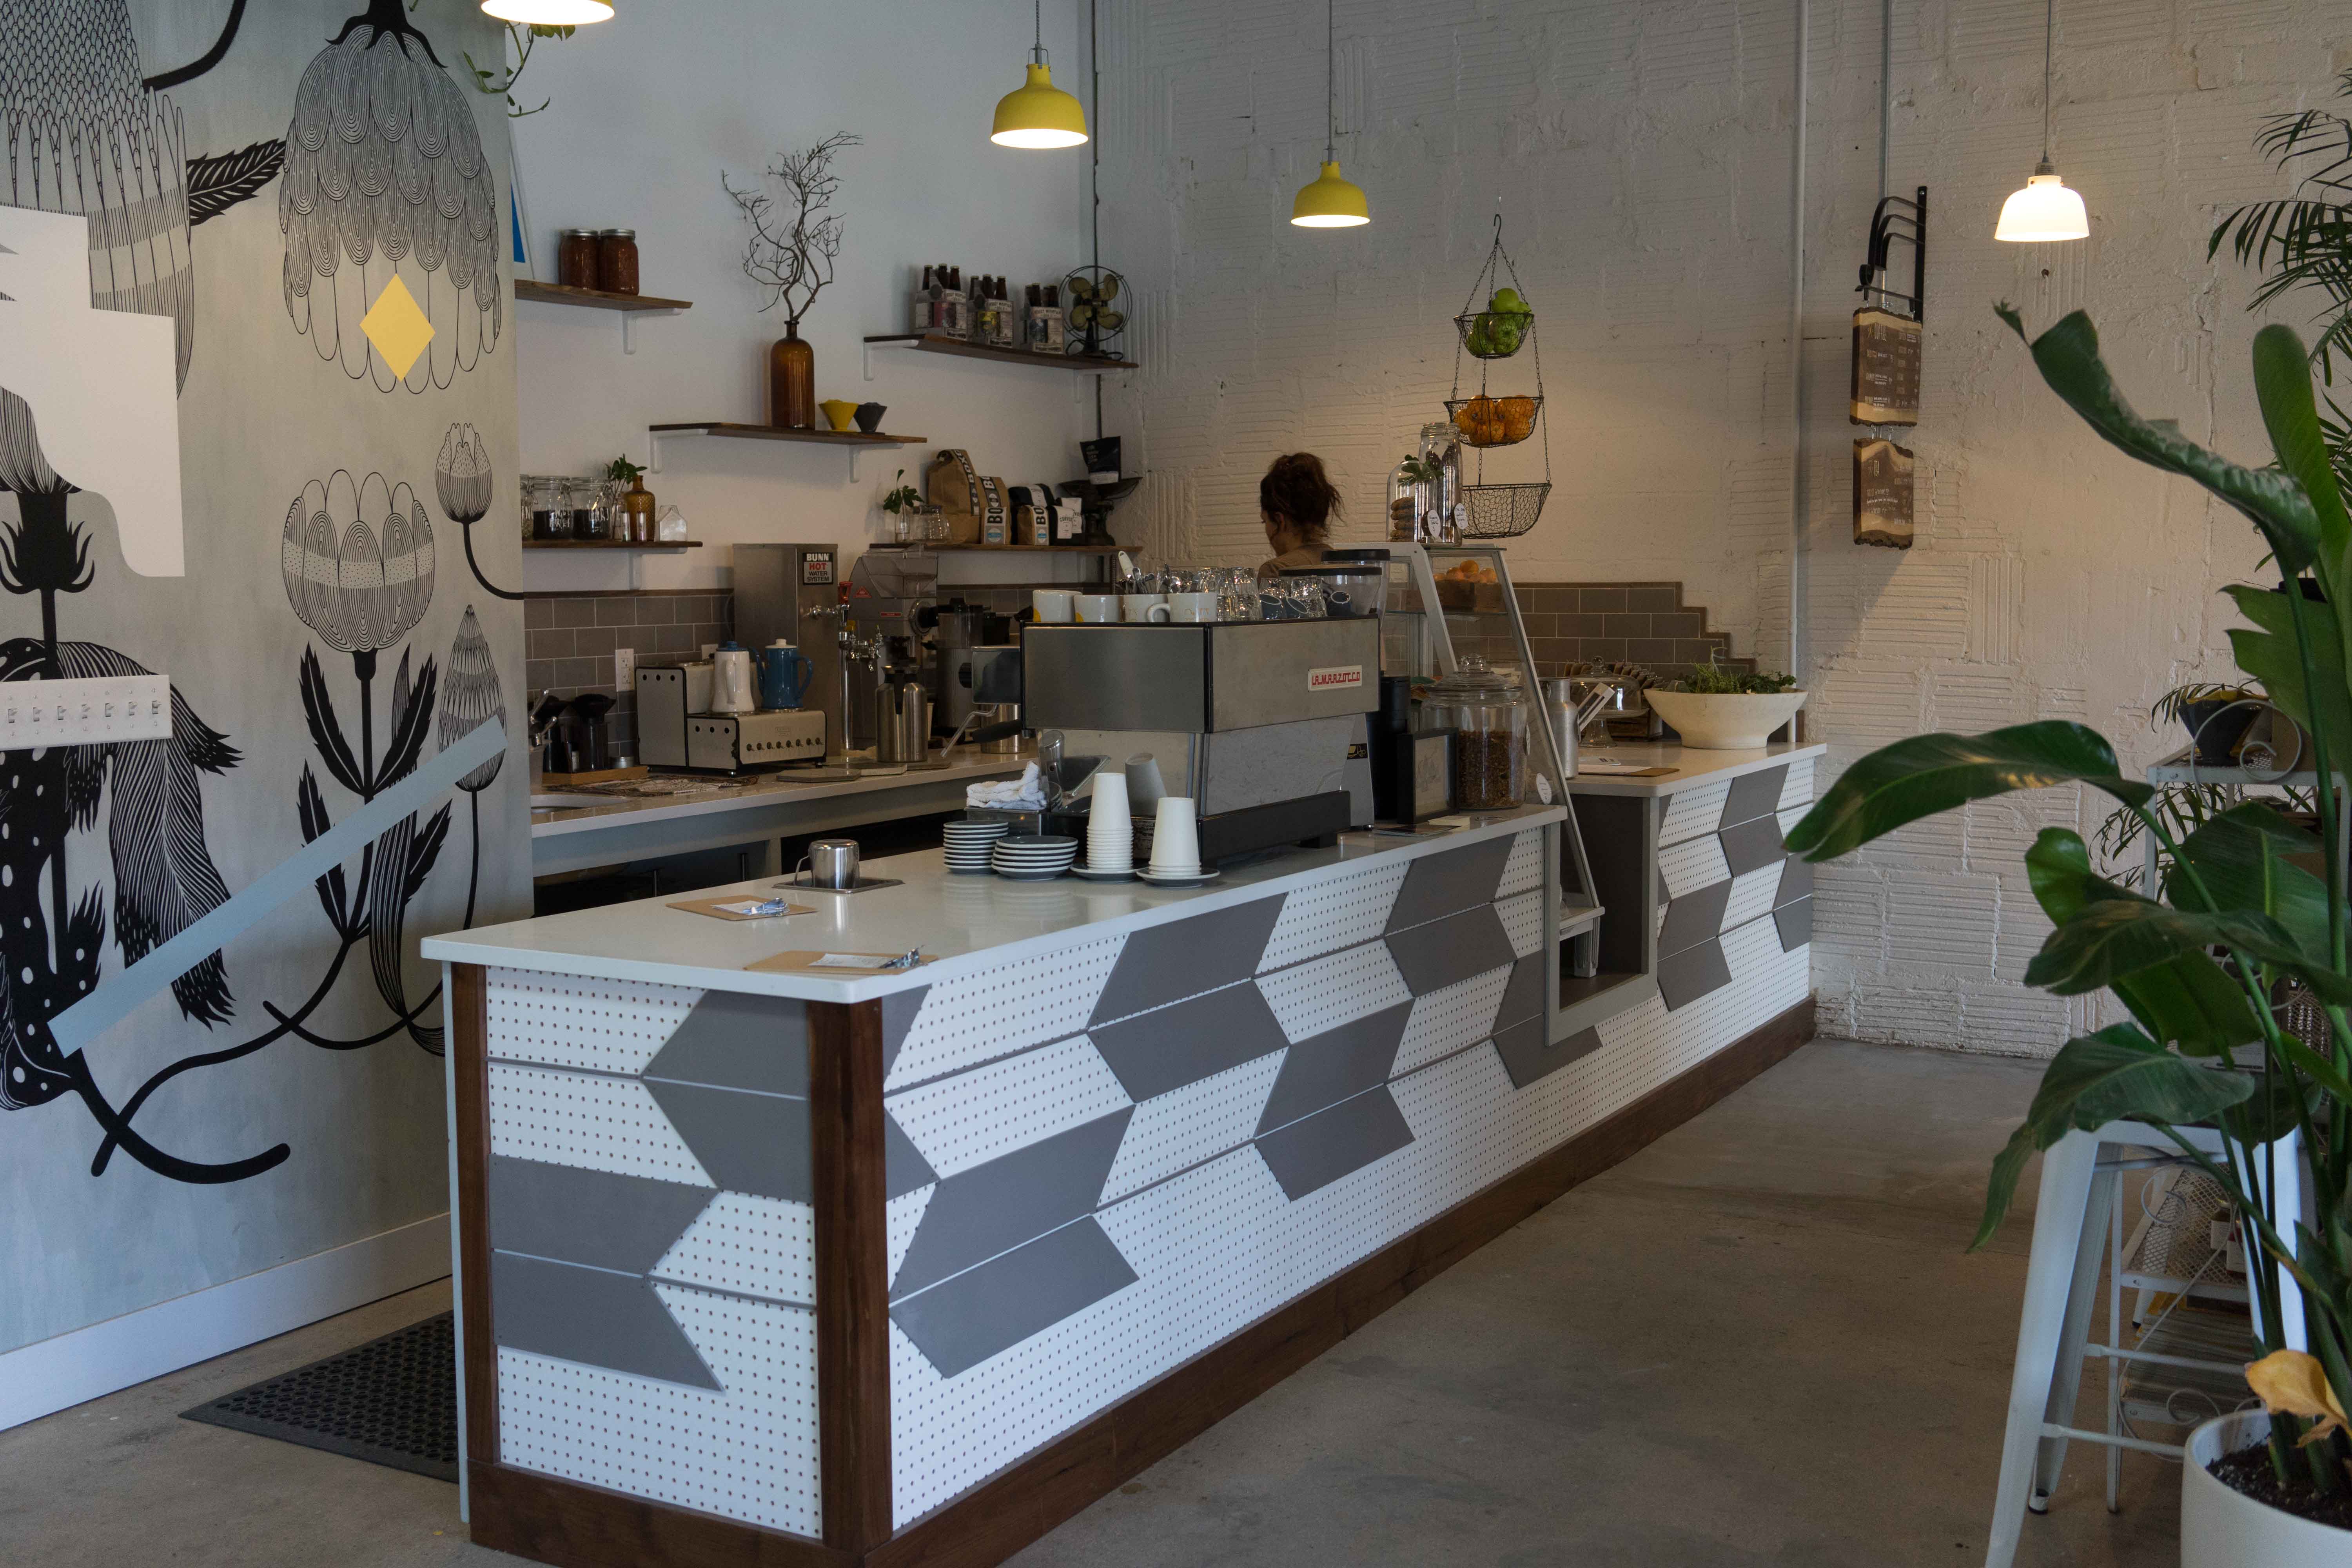 Stowaway Coffee and Kitchen (10 of 17)